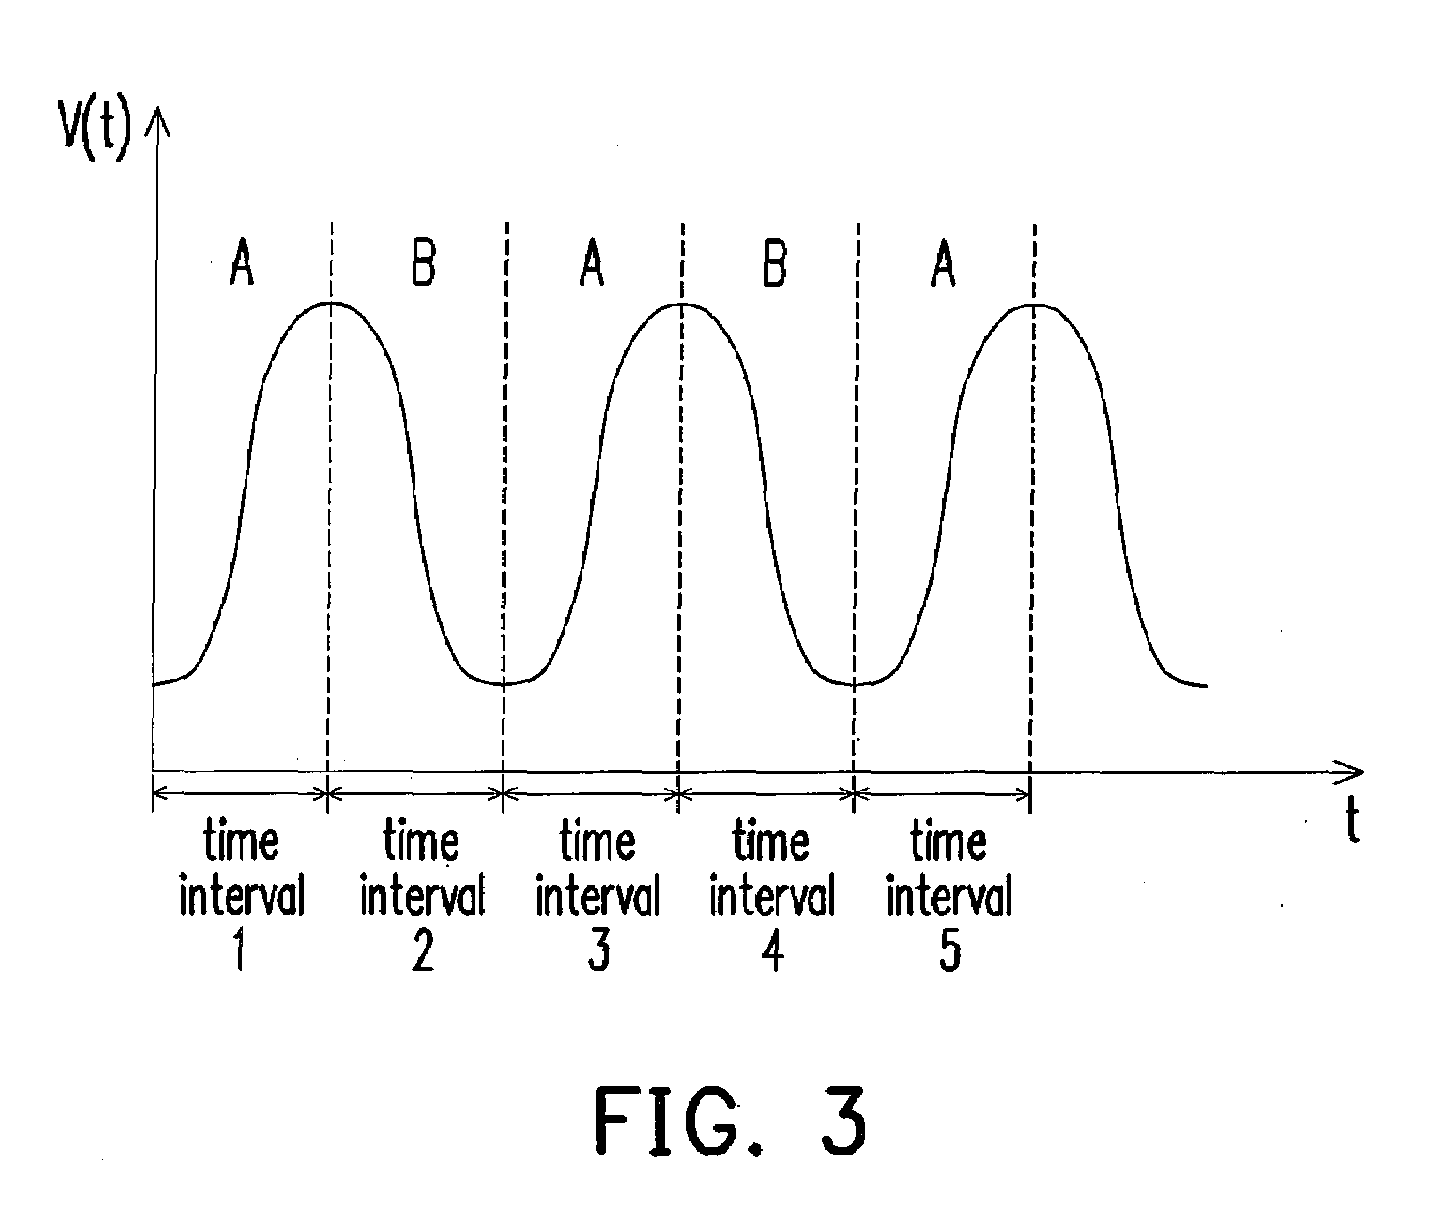 Apparatus and method for estimating noise power in frequency domain